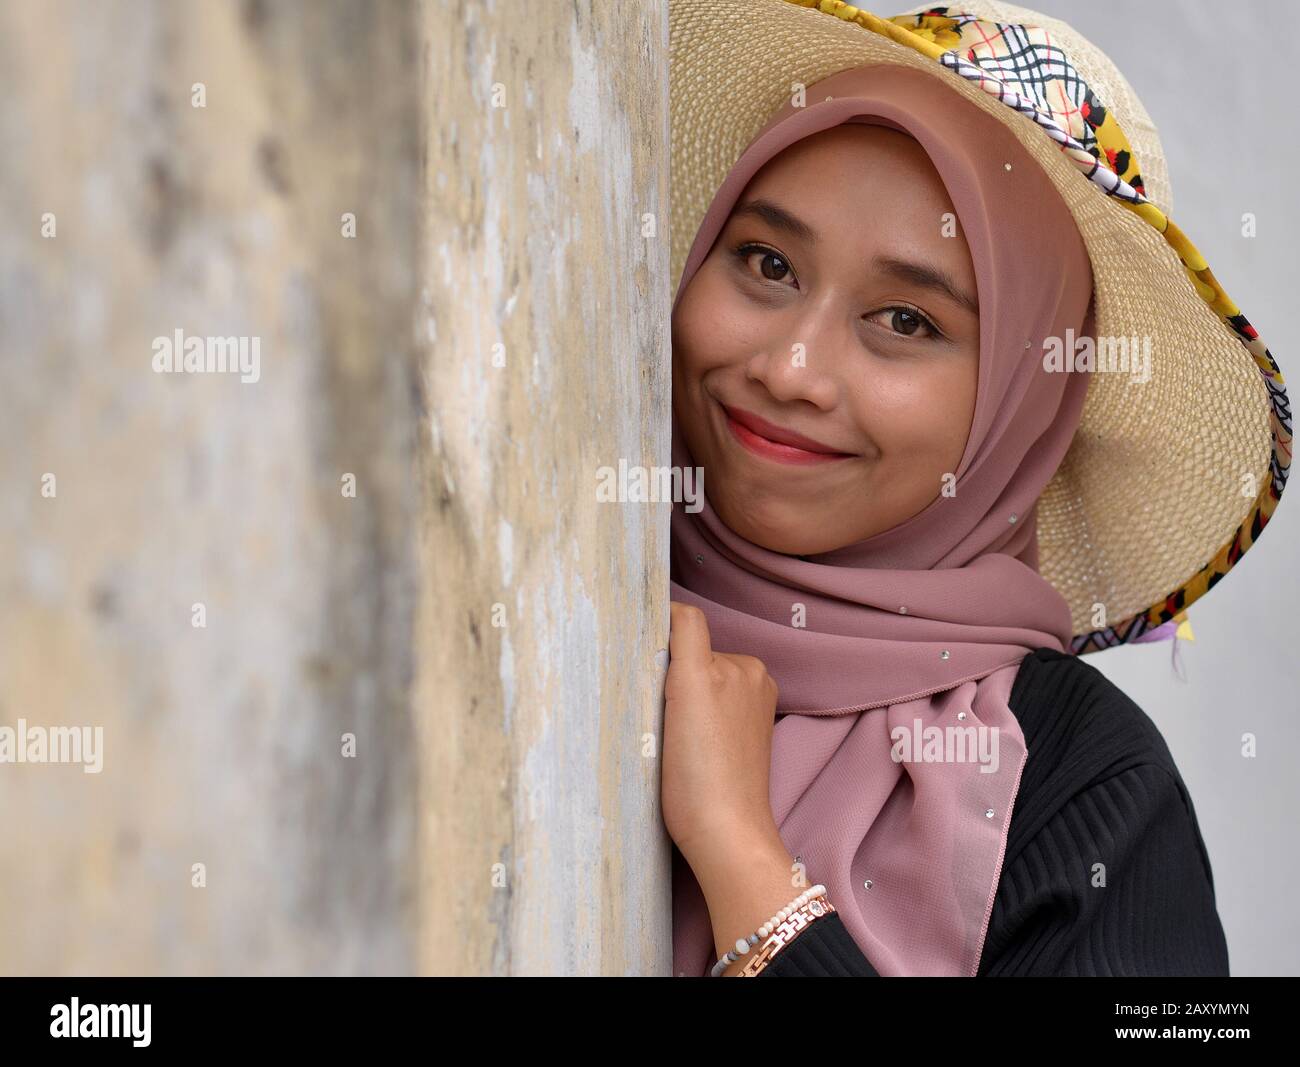 Beautiful young Malaysian Malay woman wears a modern sun hat with her traditional hijab and poses for the camera. Stock Photo